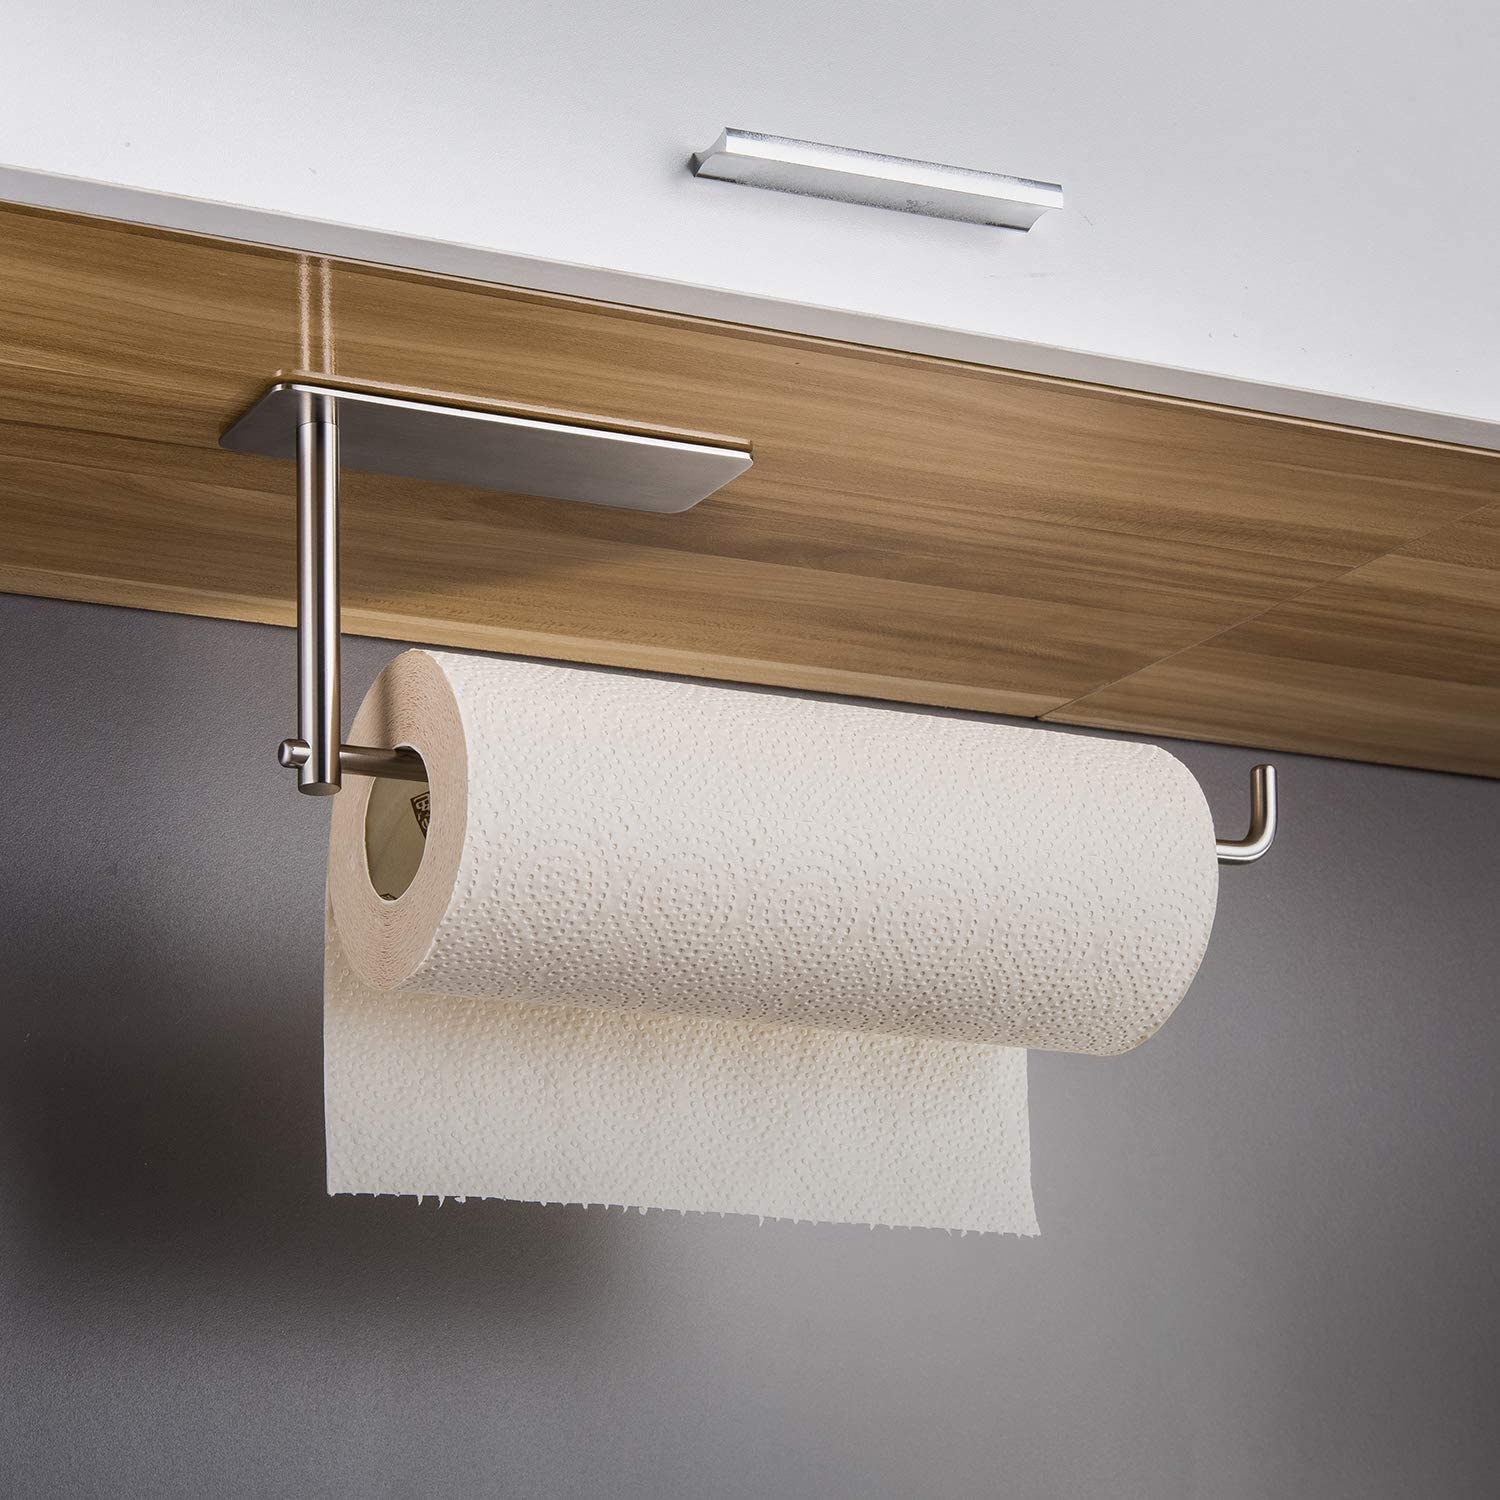 5 Best Kitchen Towel Holders of 2022: Sturdy, Adhesive, & More